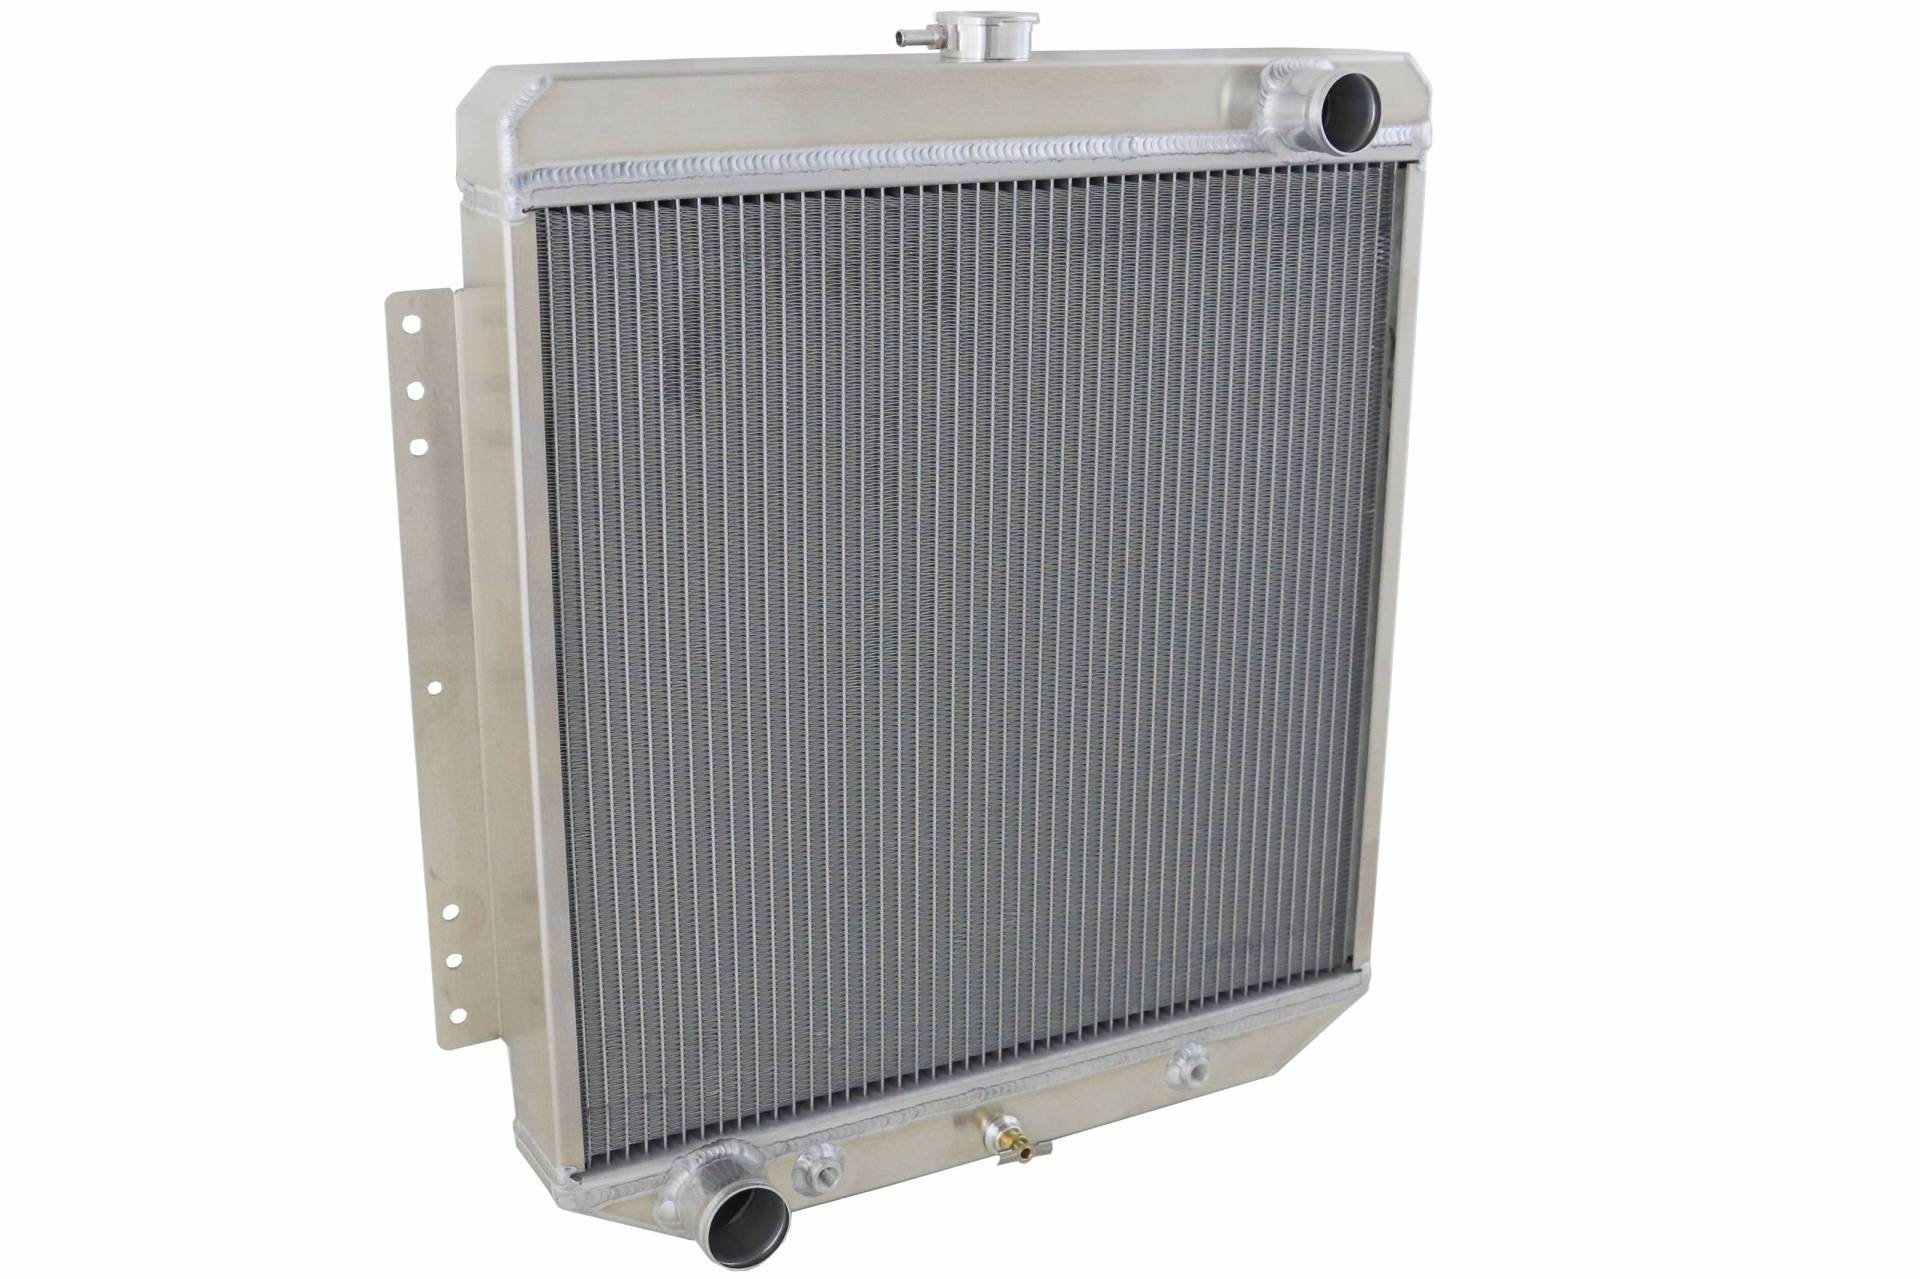 Wizard Cooling Inc - Wizard Cooling - 1956-57 Lincoln Aluminum Radiator - 41000-110